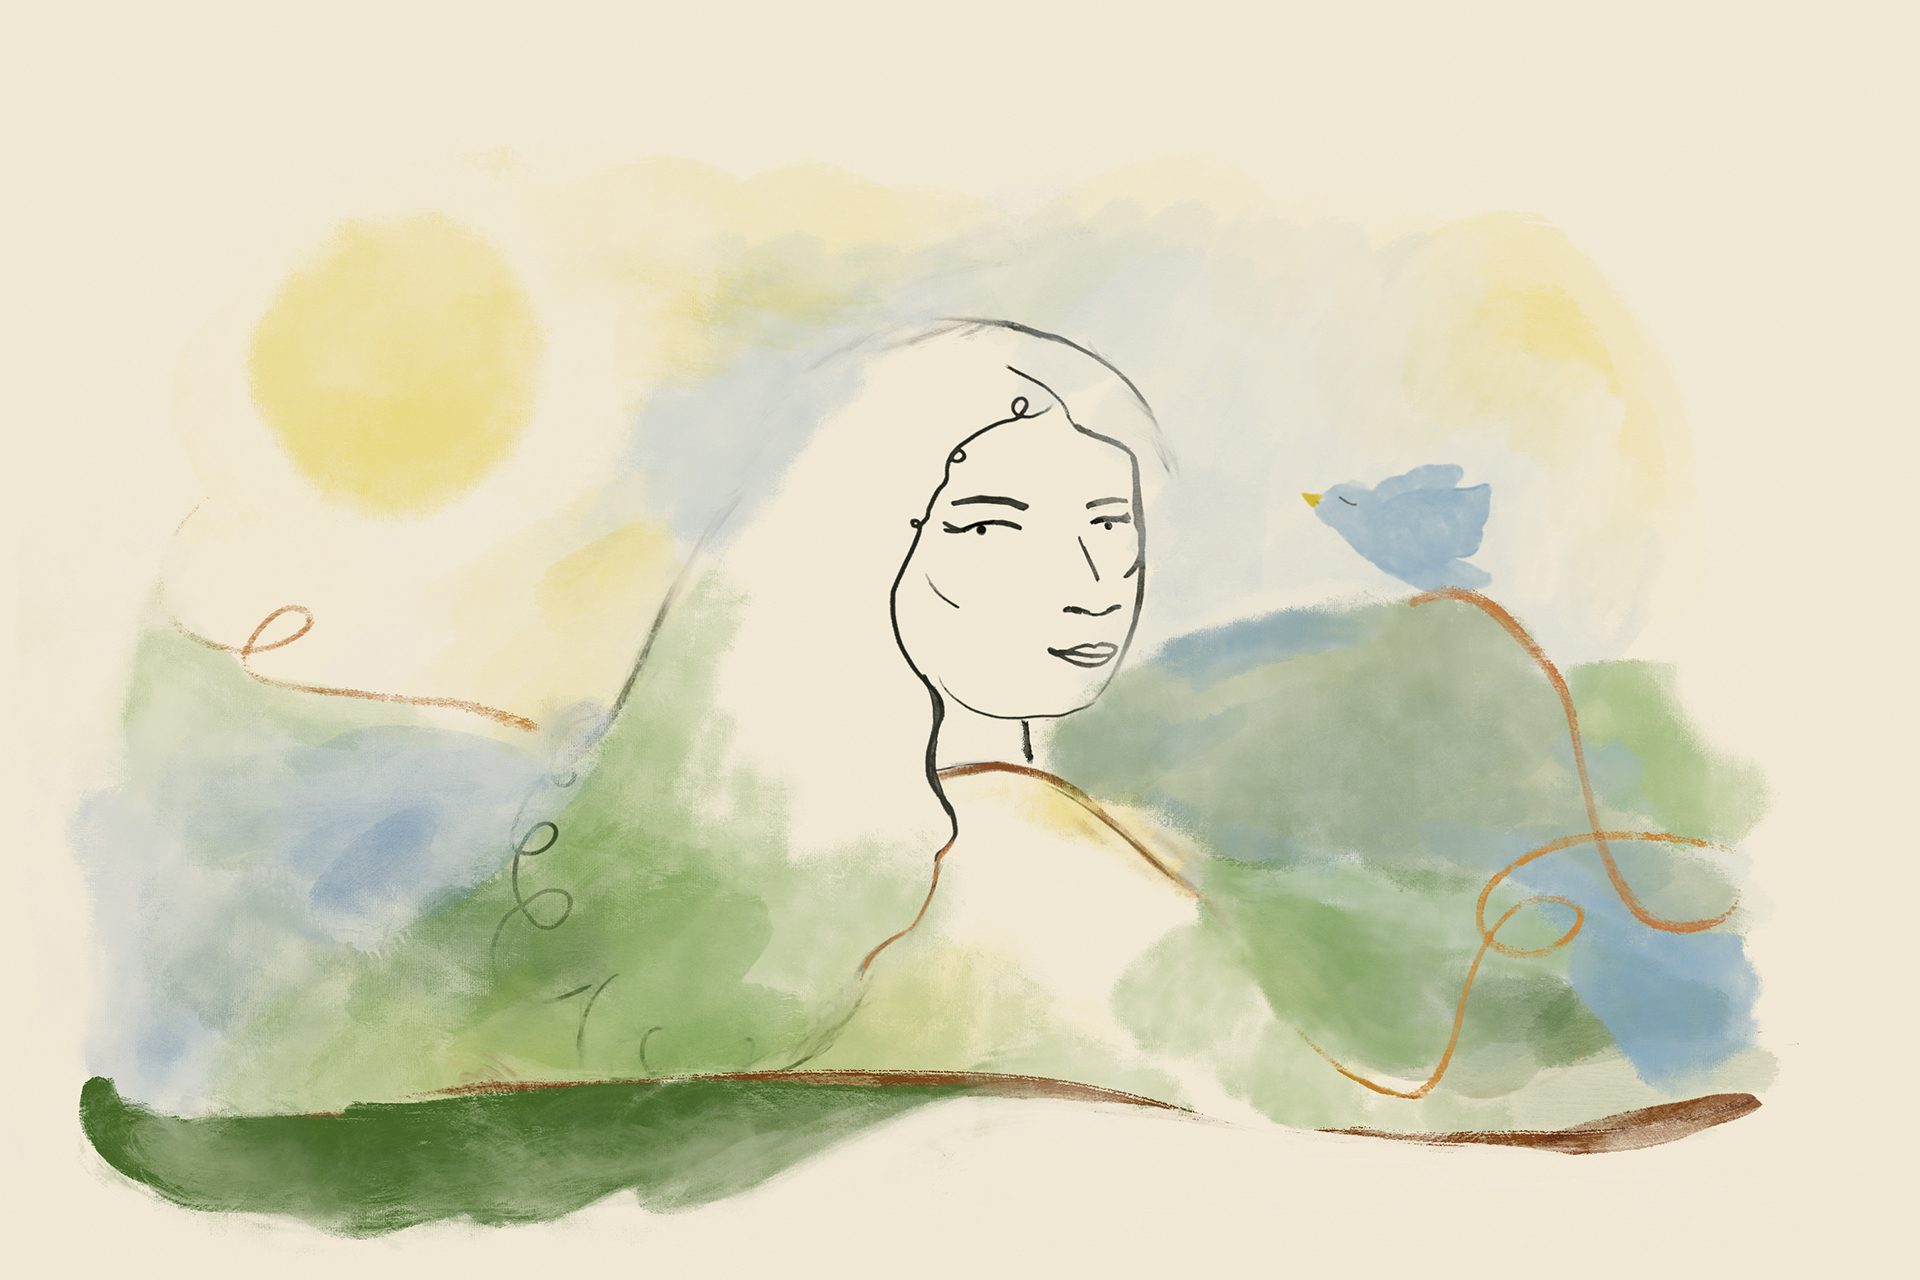 A woman looks back over her shoulder and a blue bird faces her